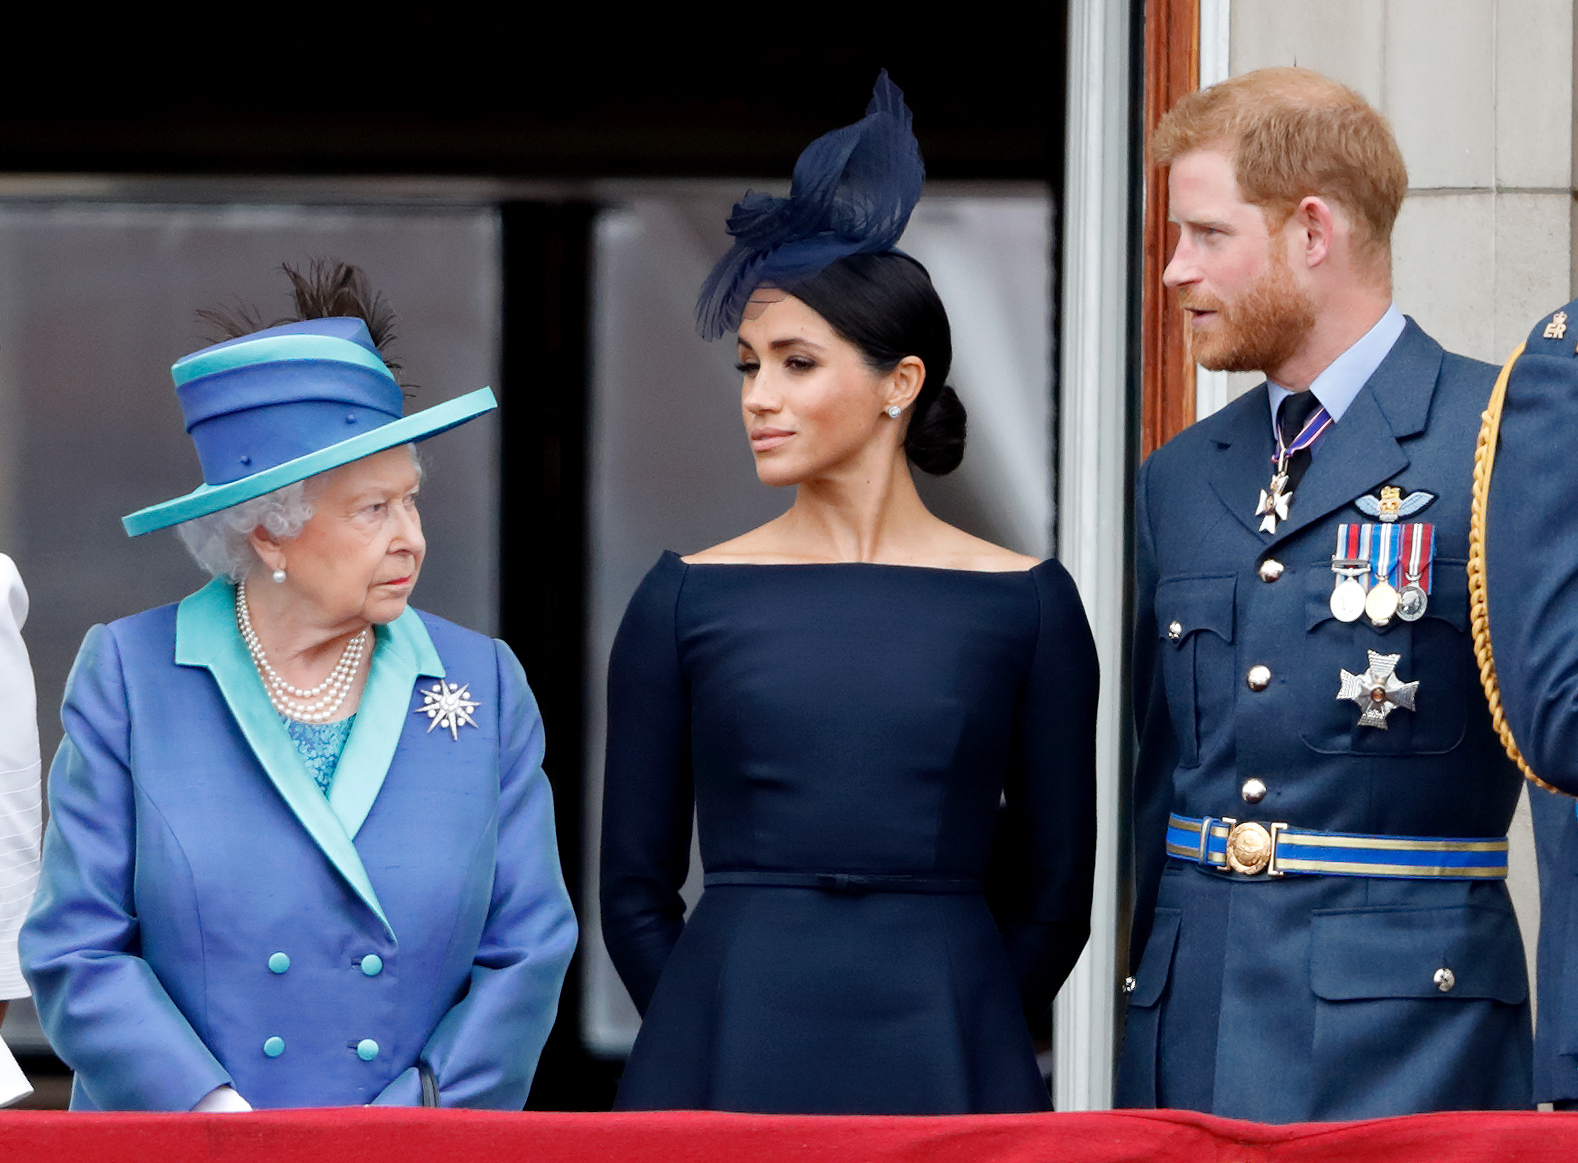 Queen Elizabeth II, Meghan Markle, and Prince Harry, standing on the balcony of Buckingham Palace during Trooping the Colour